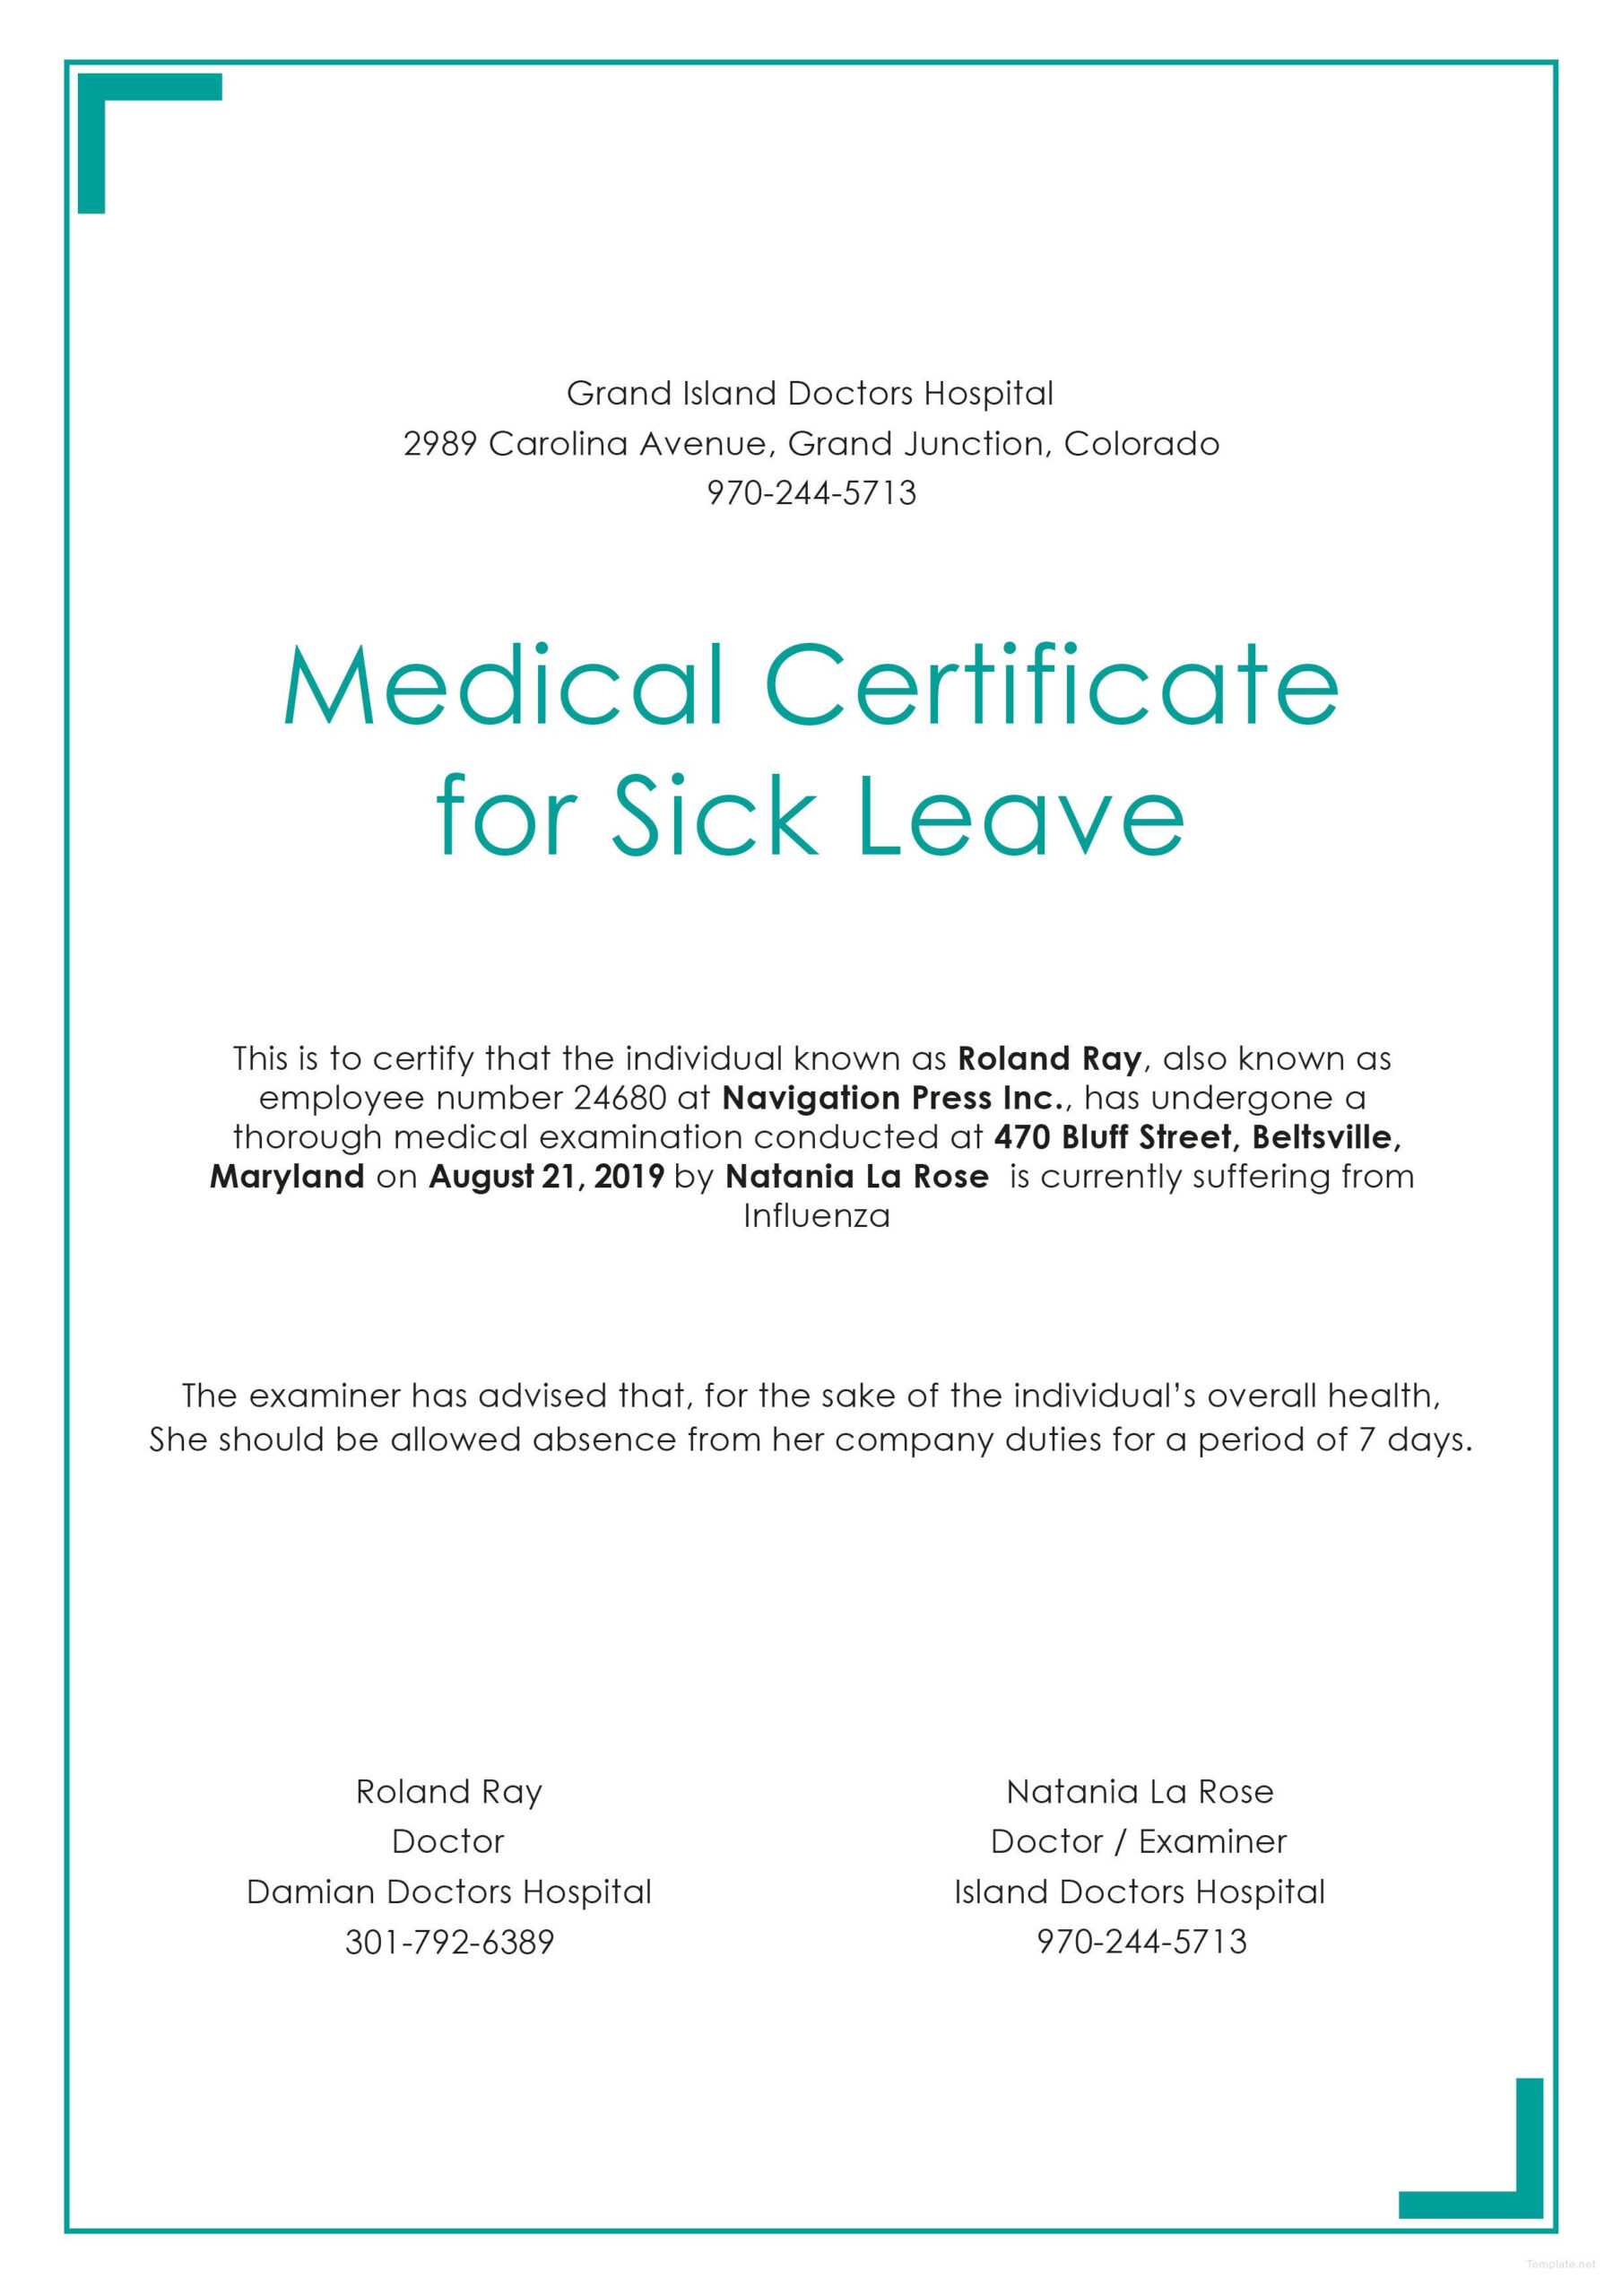 Free Medical Certificate For Sick Leave | Medical, Doctors Within Australian Doctors Certificate Template